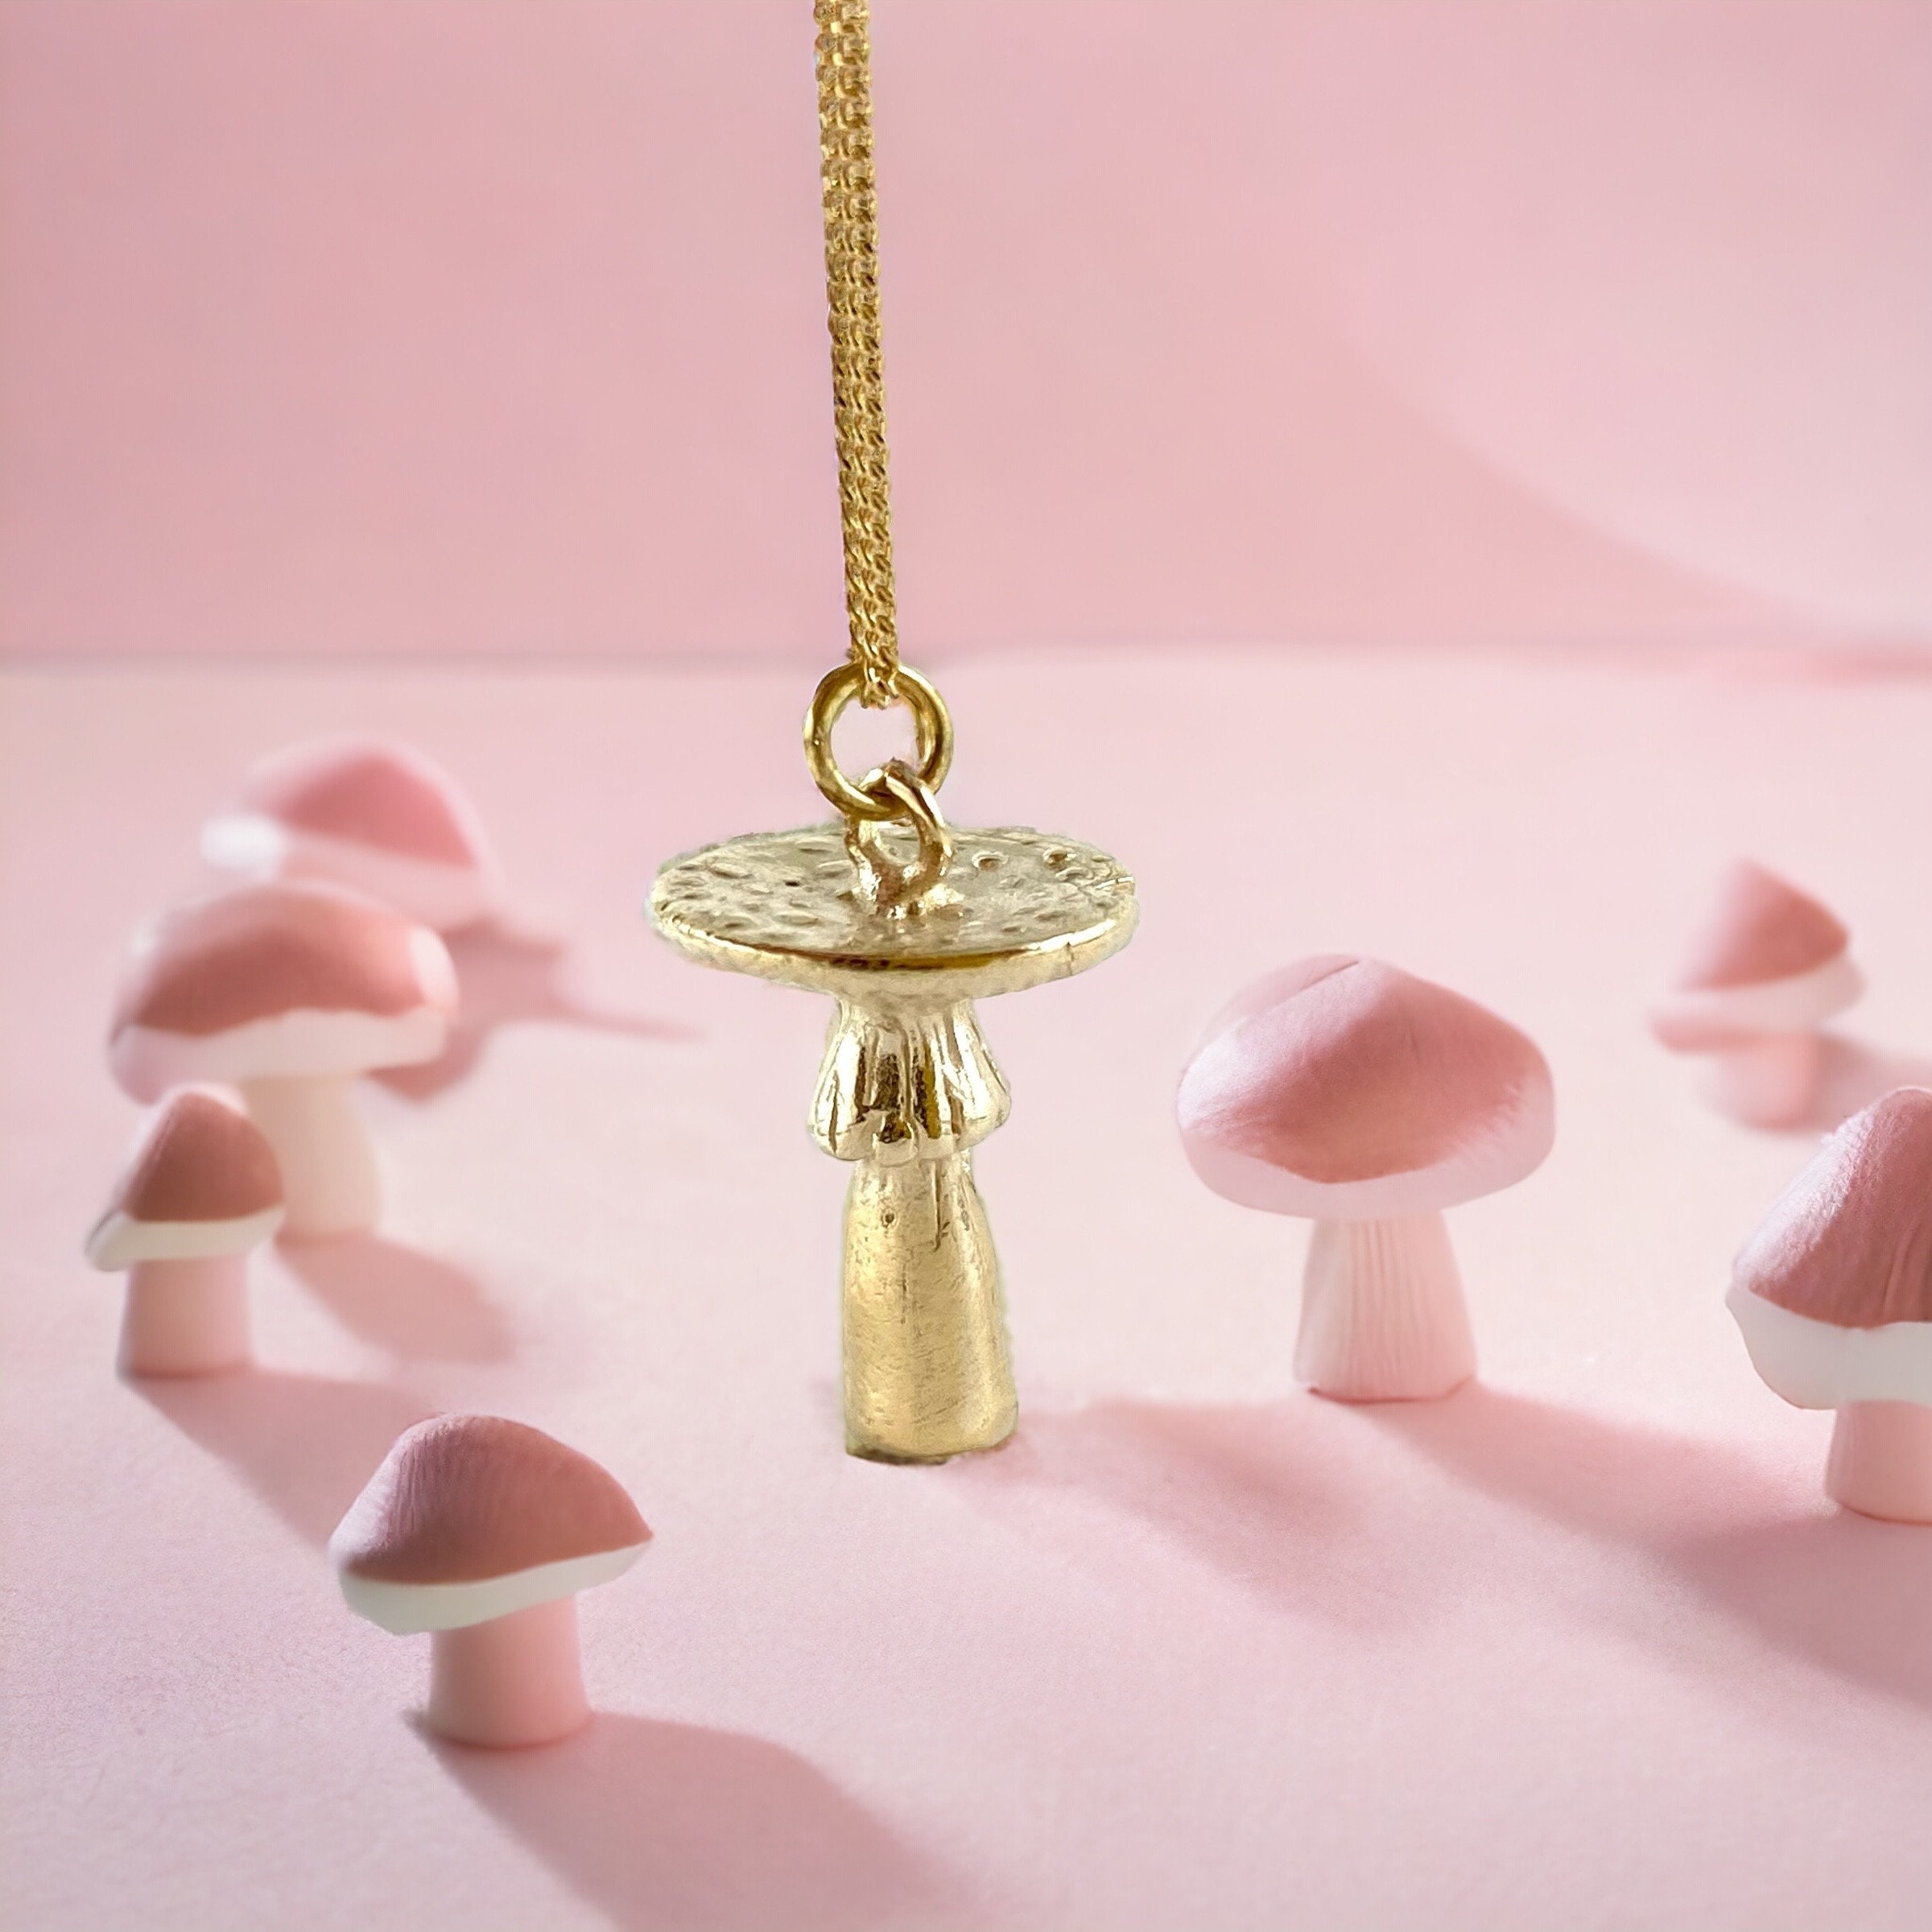 Cute Gold Plated Stainless Steel Mushroom Pendant Necklace Women Neck  Accessories, Fashion Plant Necklaces Female Jewelry - Necklace - AliExpress